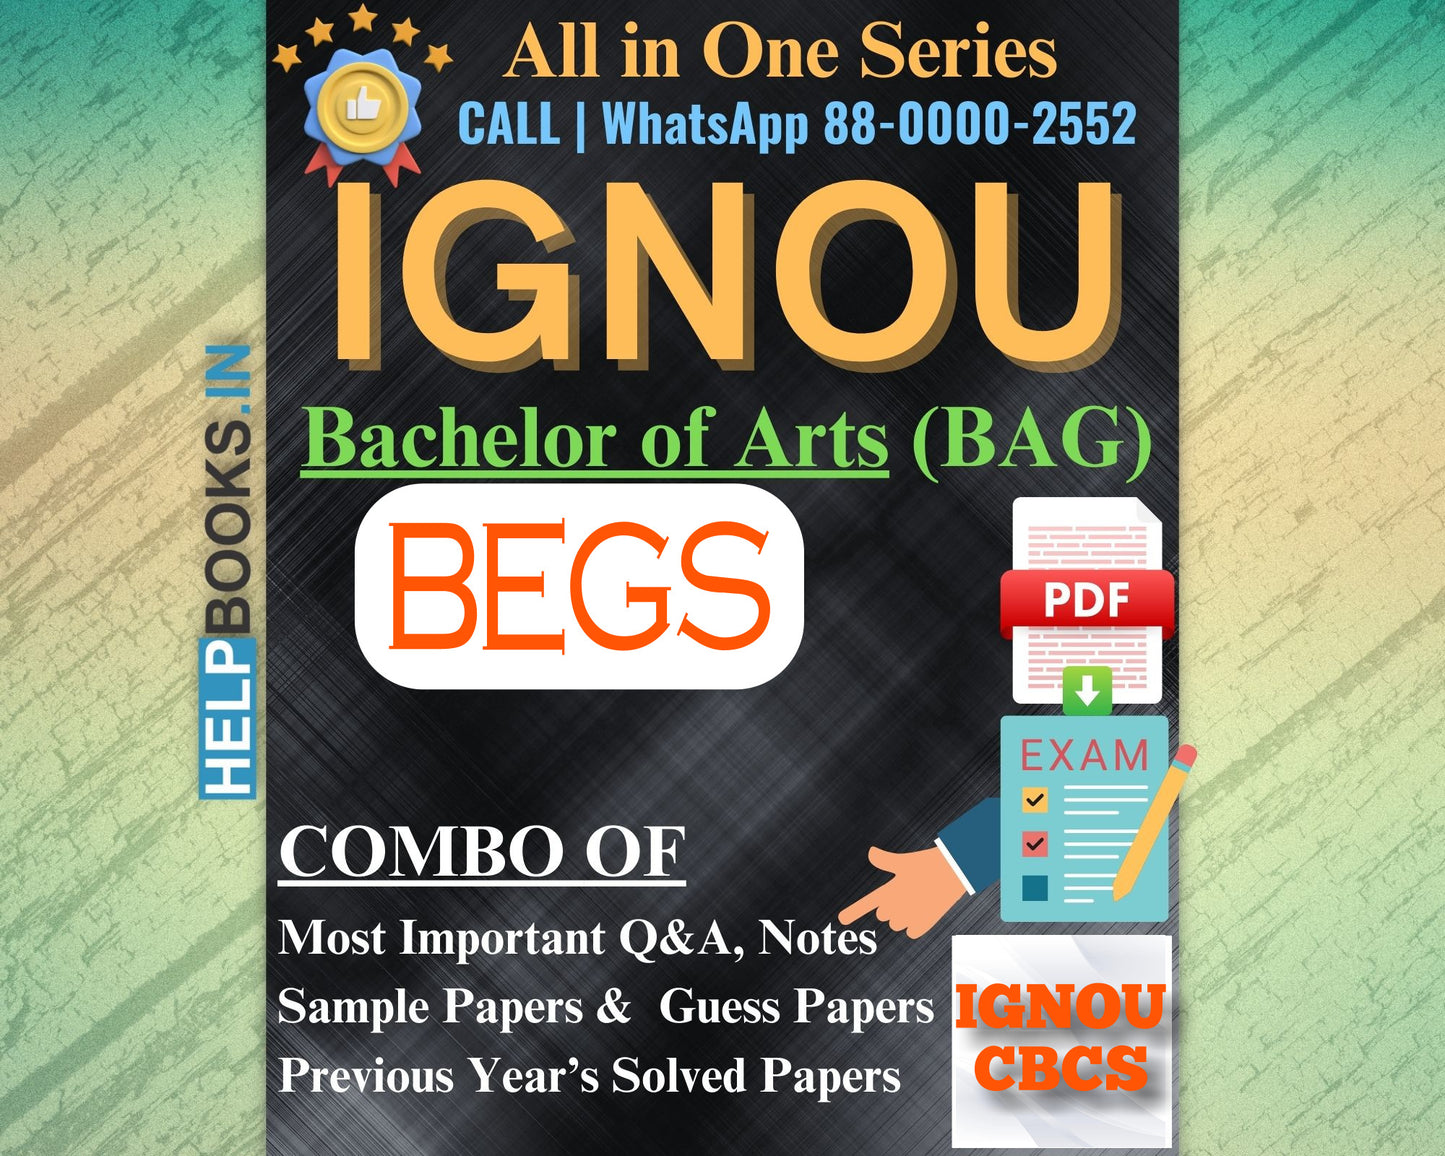 IGNOU BAG Online Study Package: Bachelor of Arts (BA) - Previous Years Solved Papers, Q&A, Exam Notes, Sample Papers, Guess Papers-BEGS183, BEGS185, BEGS186